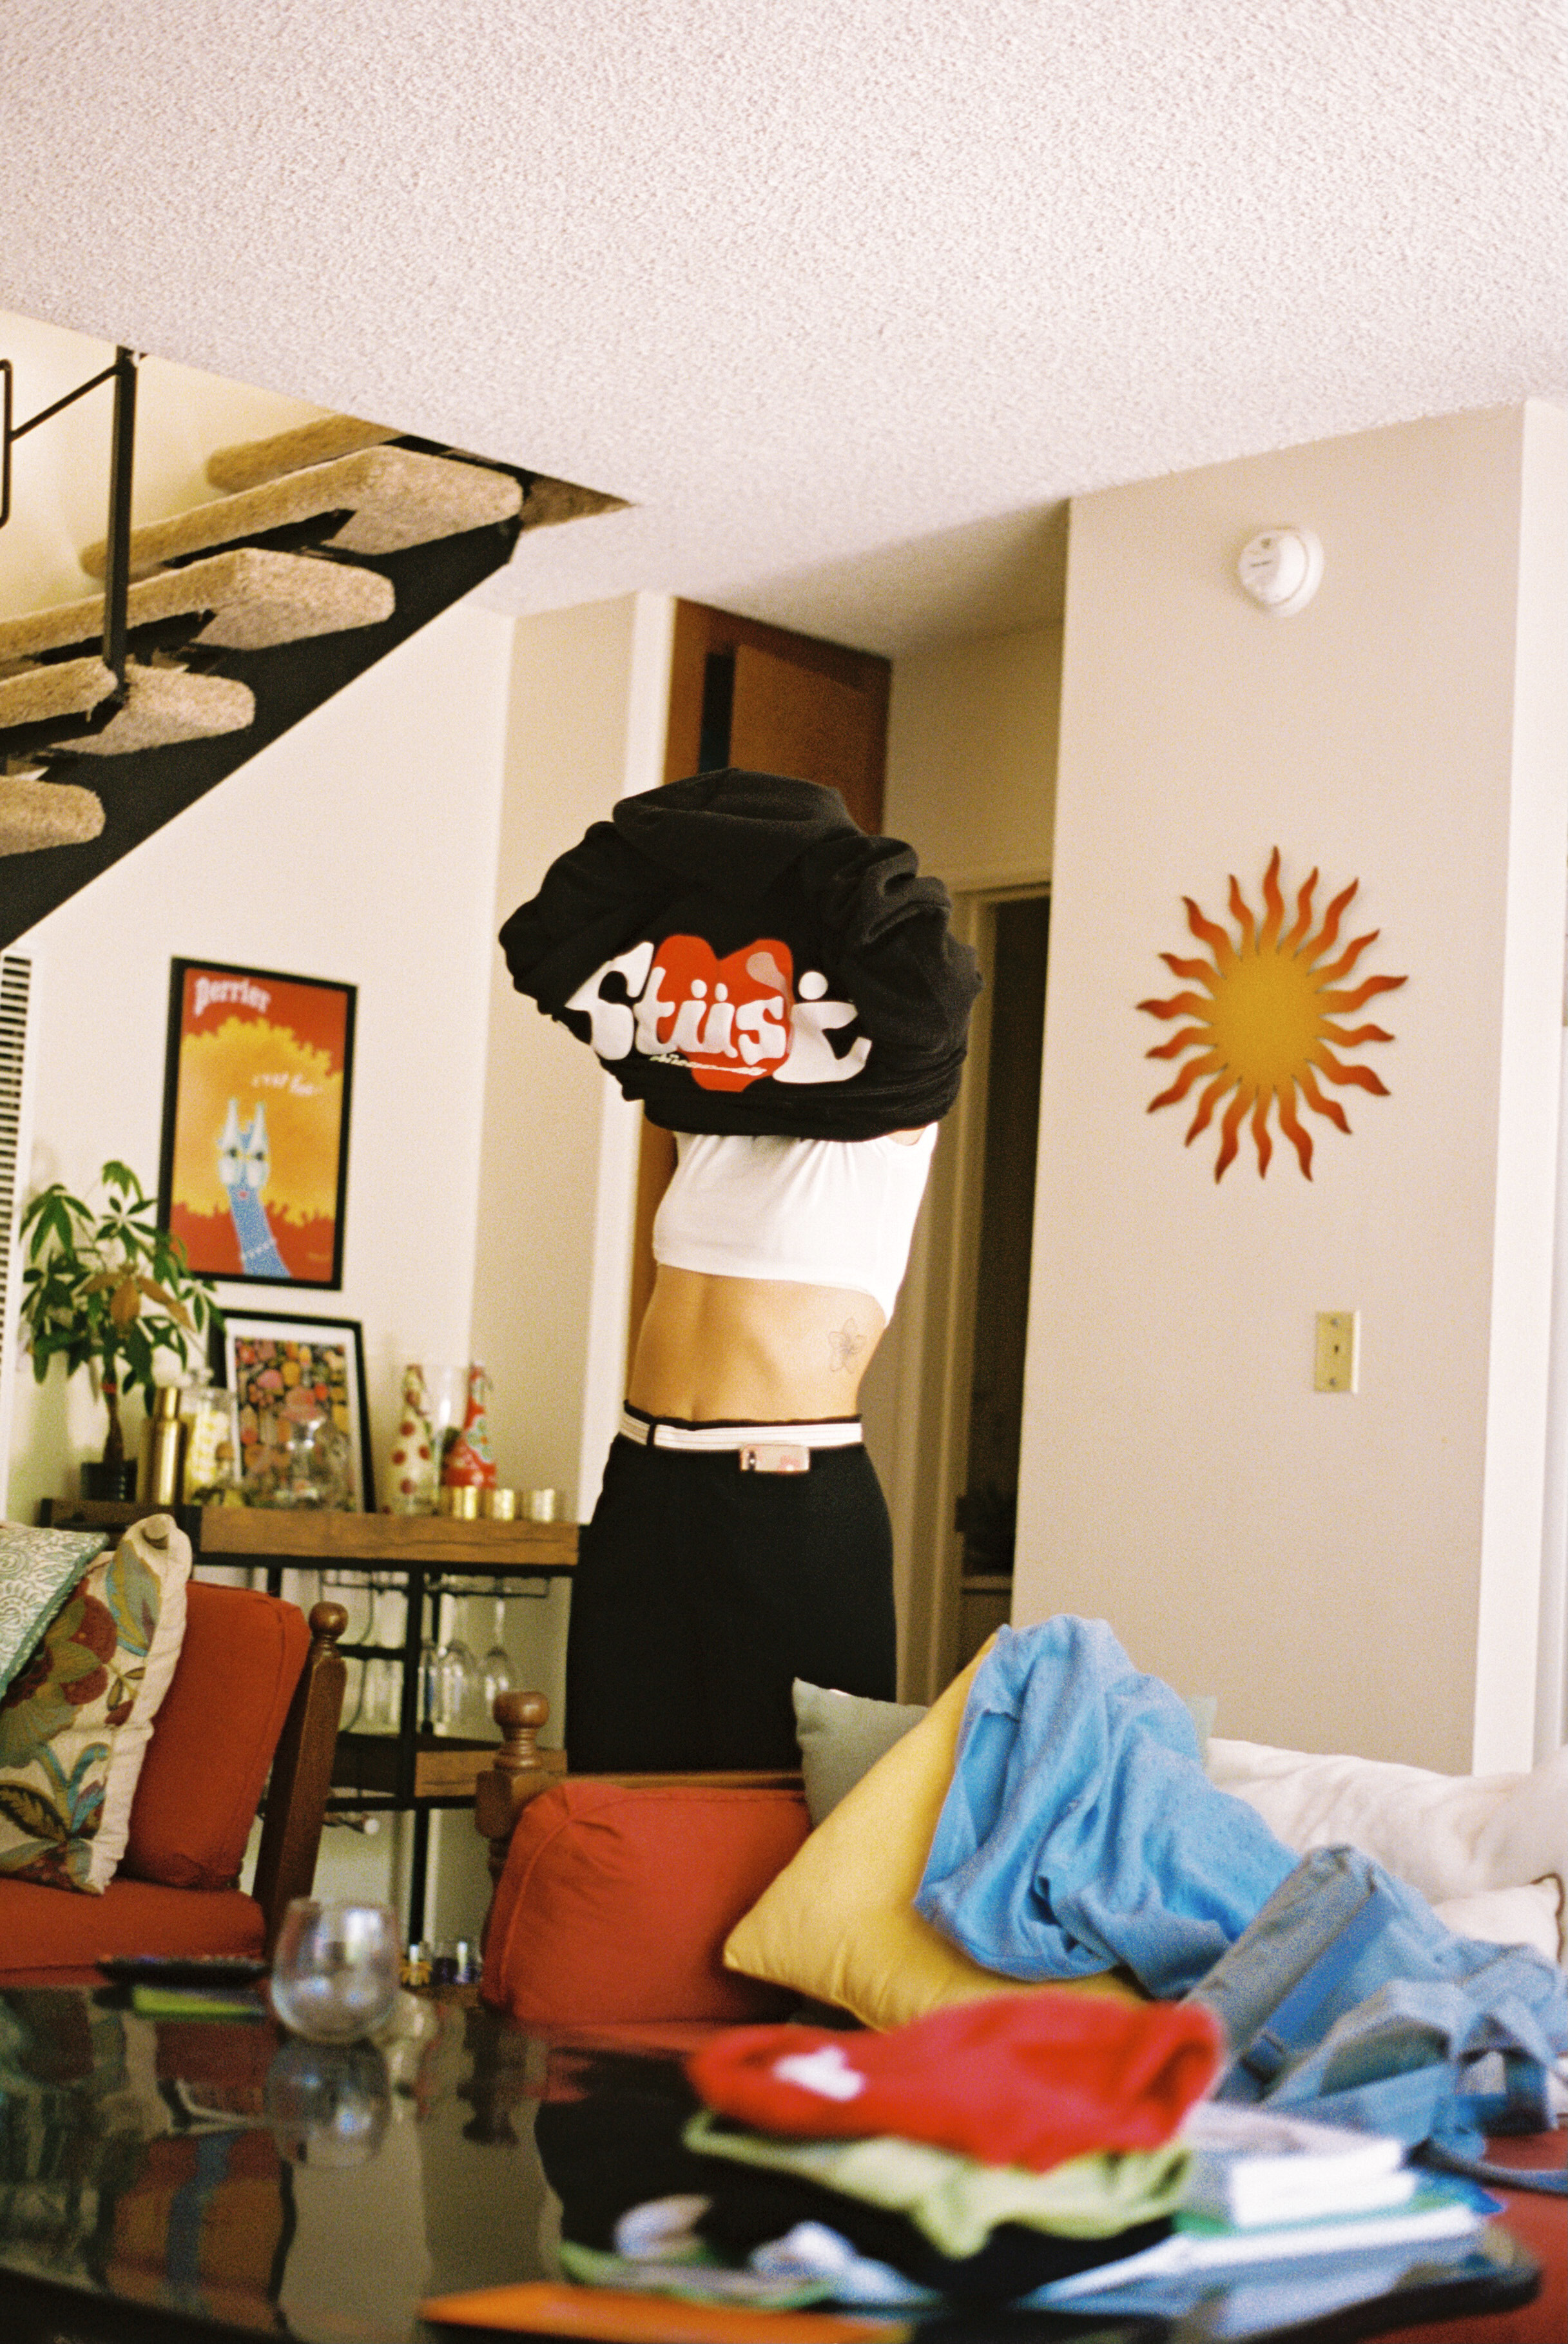 A woman lifts a top over her head as she stands in a living room by the stares. A sun and cat paintings are on the wall and the sofas have clothes and cushions on them. 